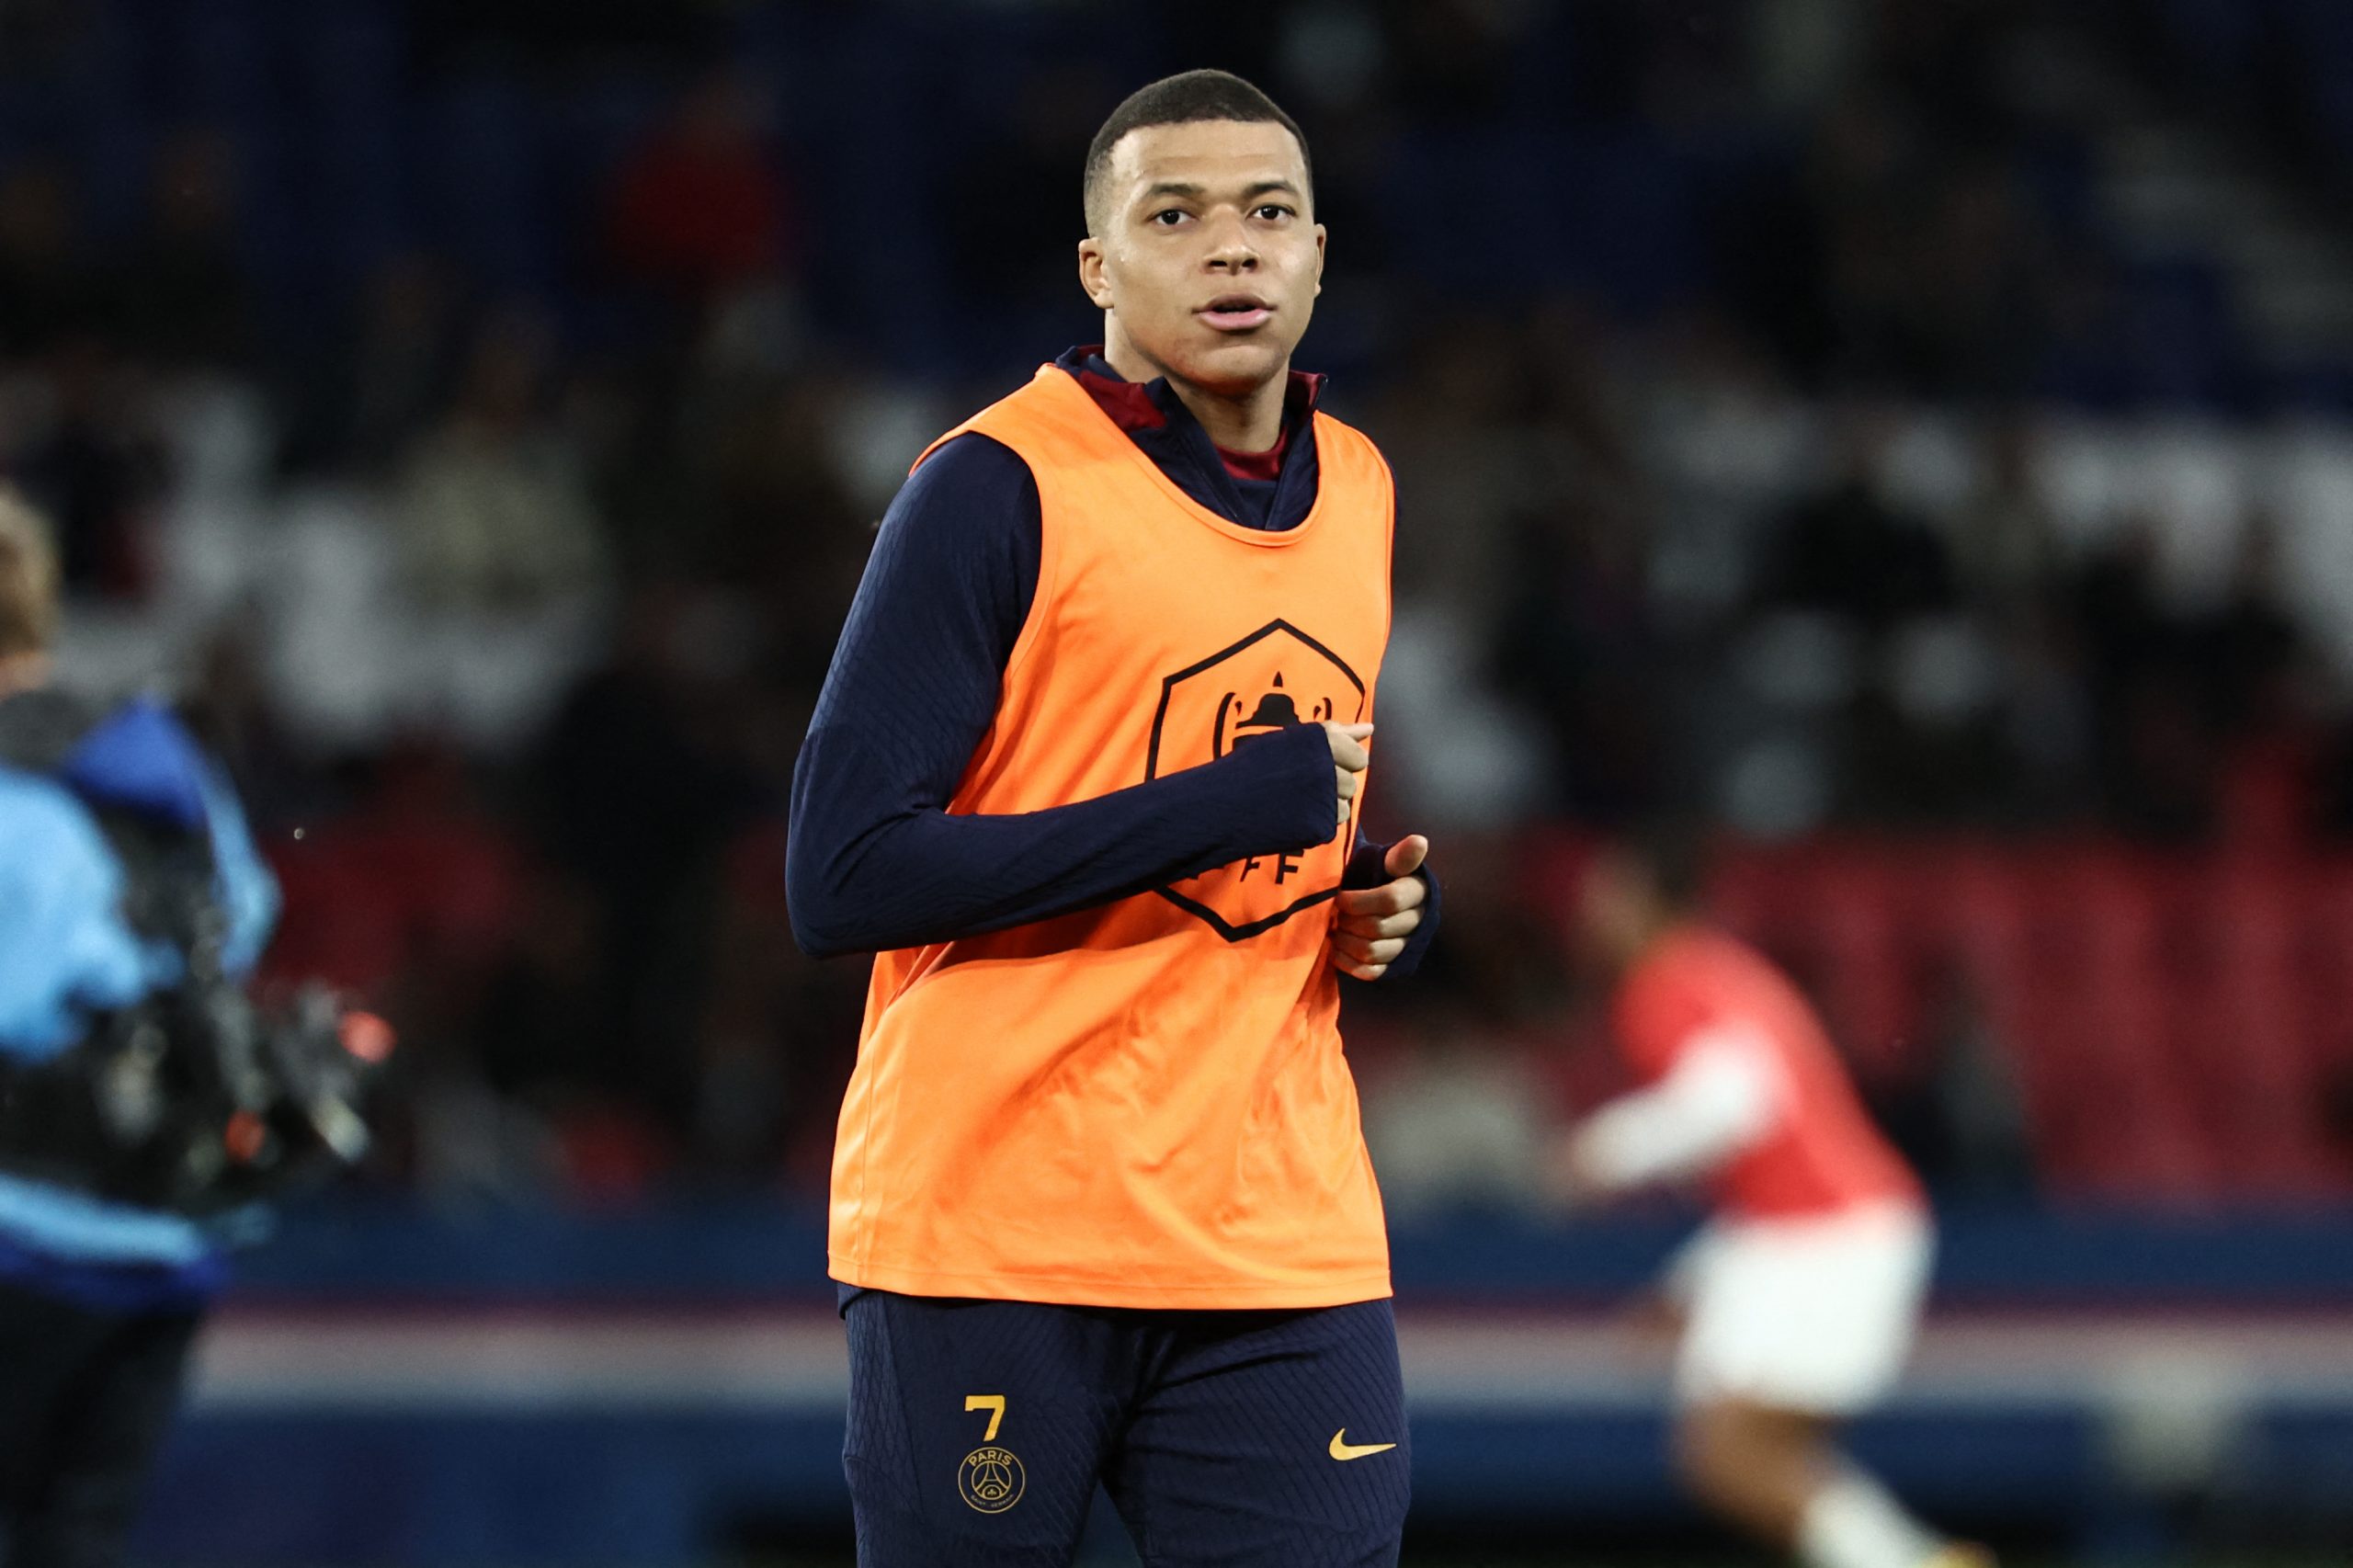 Manchester United could lose out on their summer target to Paris Saint-Germain